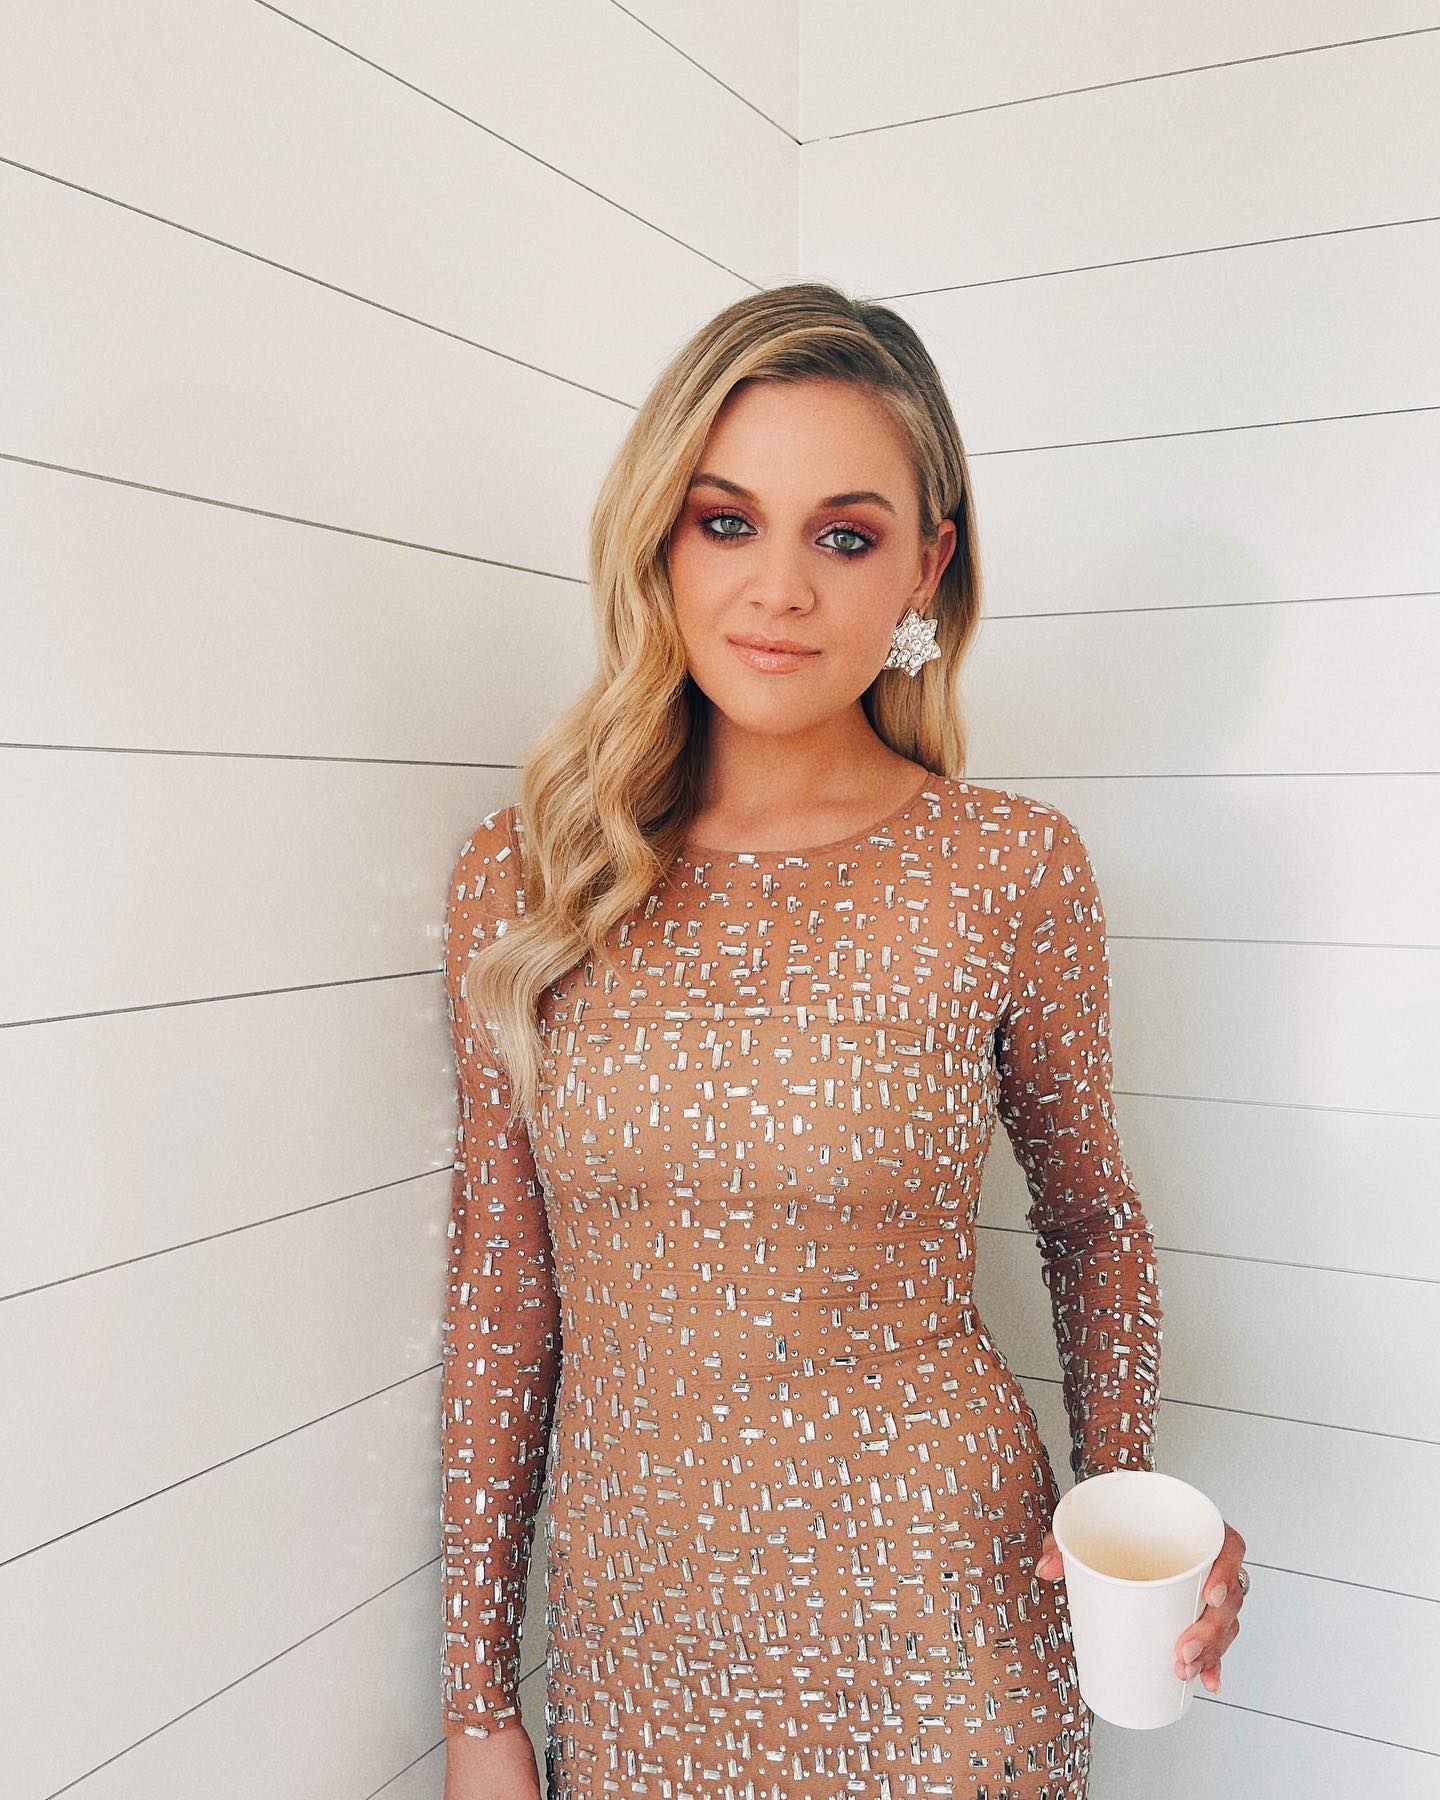 Know About Kelsea Ballerini Bio, Age, Height, Weight, Body Measurements, Bra Size, Net Worth